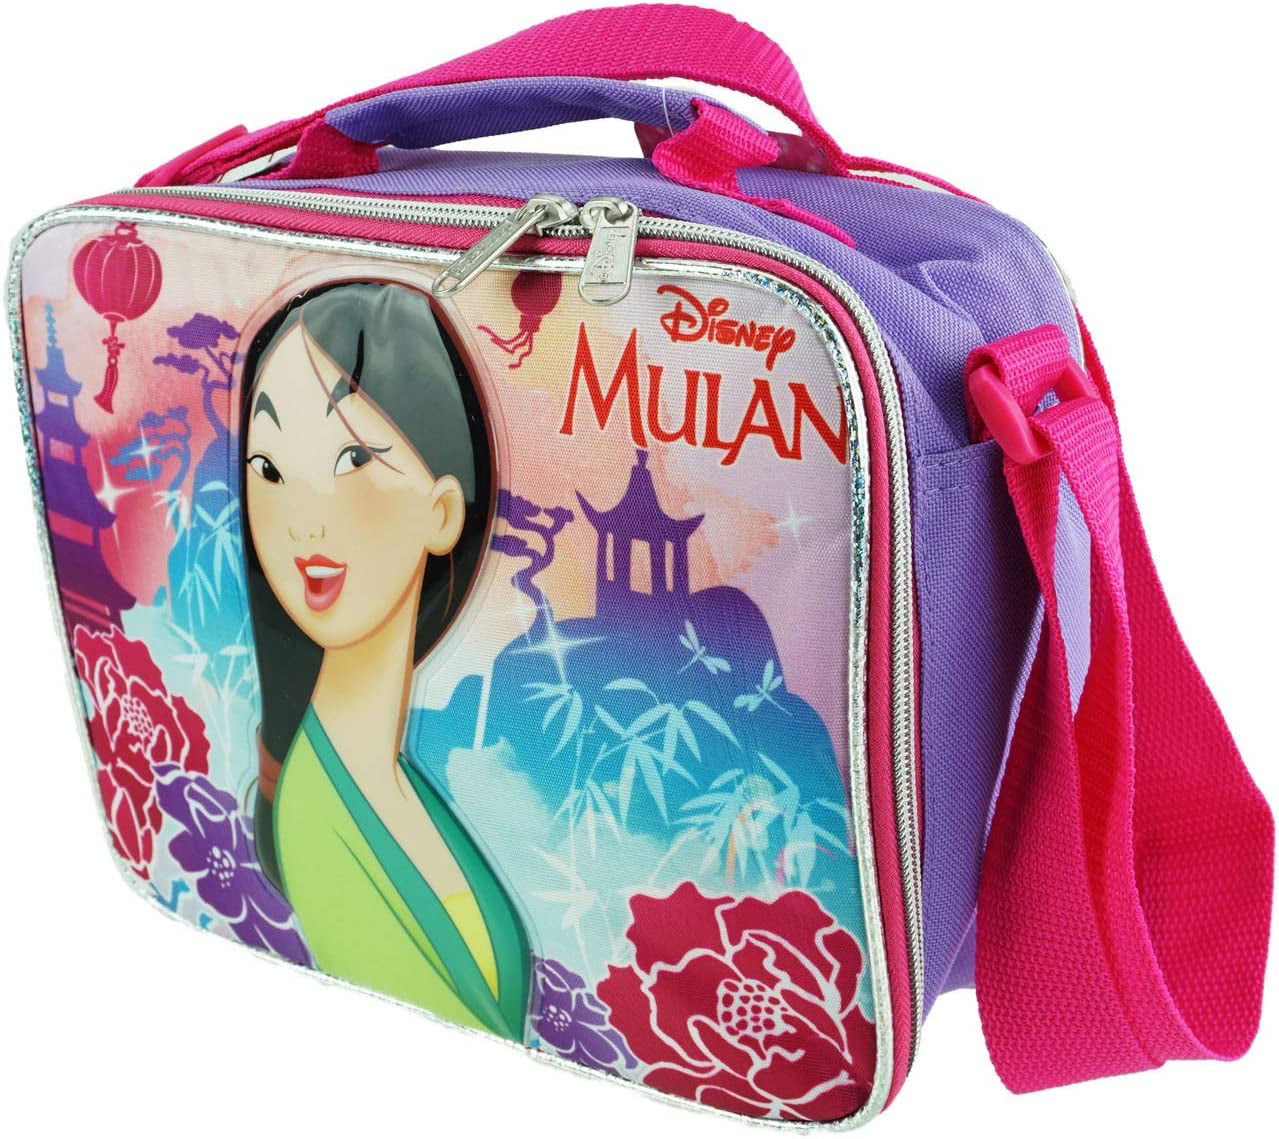 Disney Princess - Mulan Insulated Lunch Box With Adjustable Shoulder Straps  